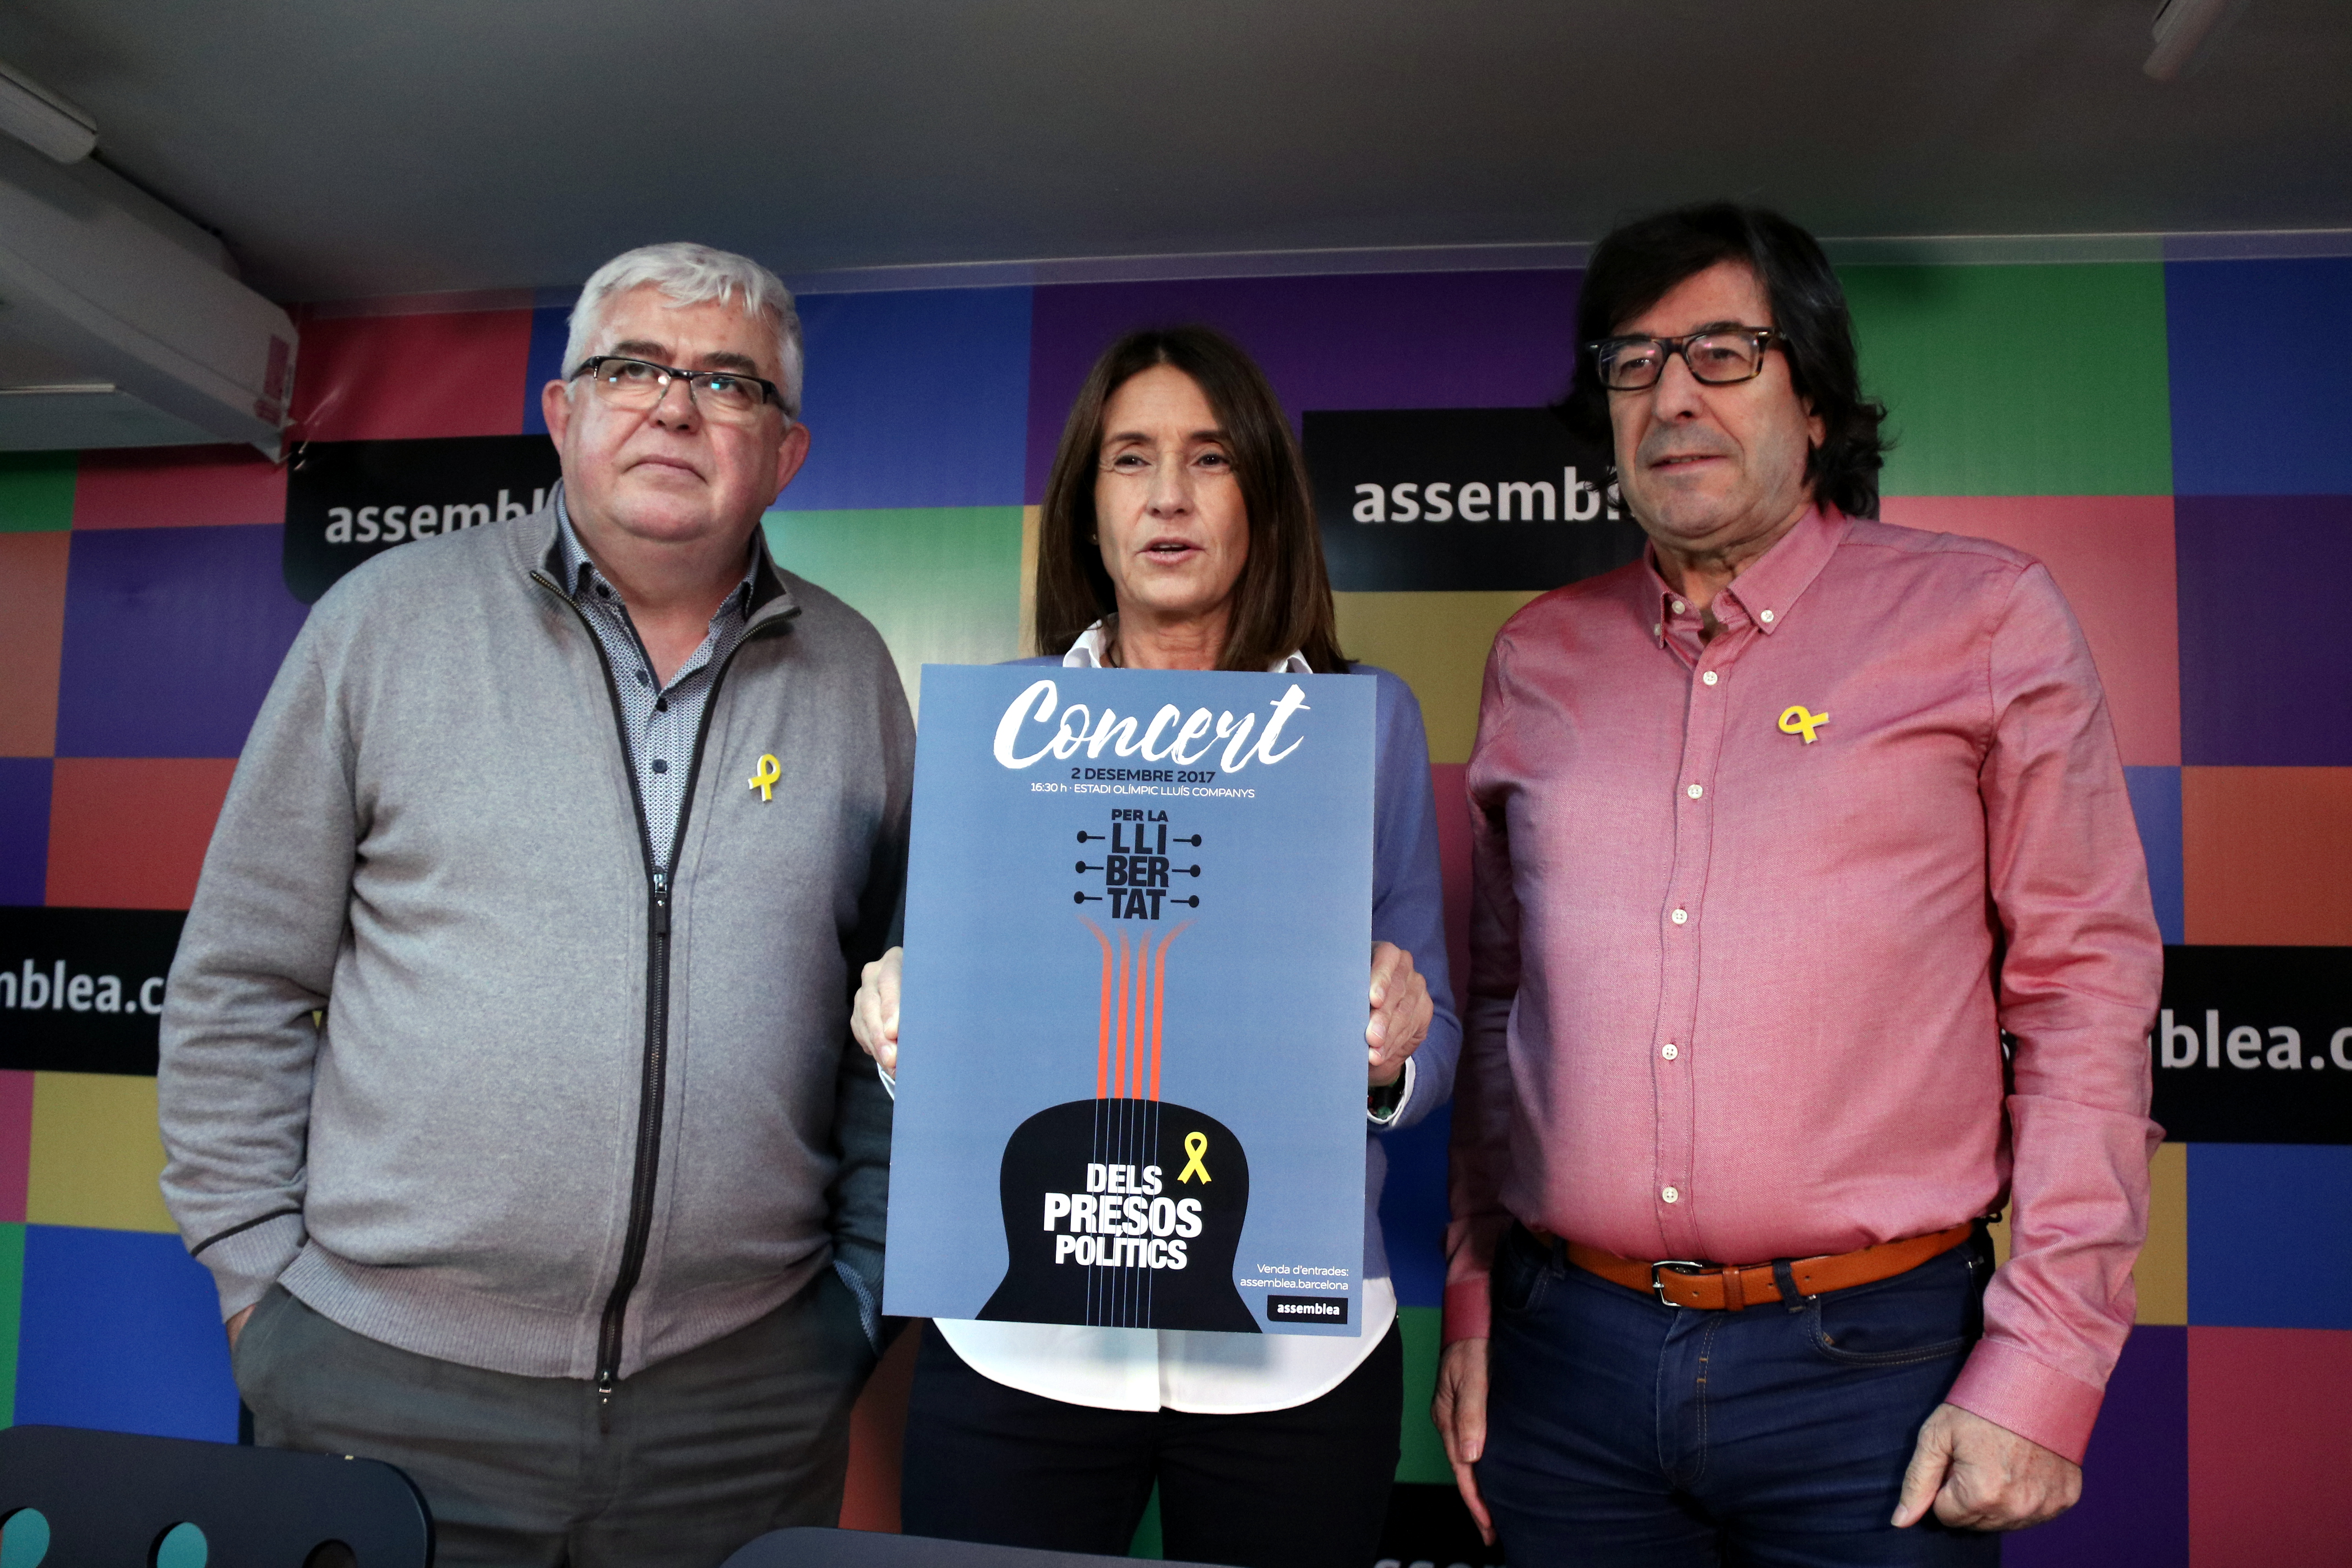 Vice president of the Catalan National Assembly Agustí Alcoberro, producer and ANC member Linus Puchal, and artistic producer of the concert Gemma Recoder at the press release for the 'Concert for the Freedom of Political Prisoners' On november 21 (by Núr